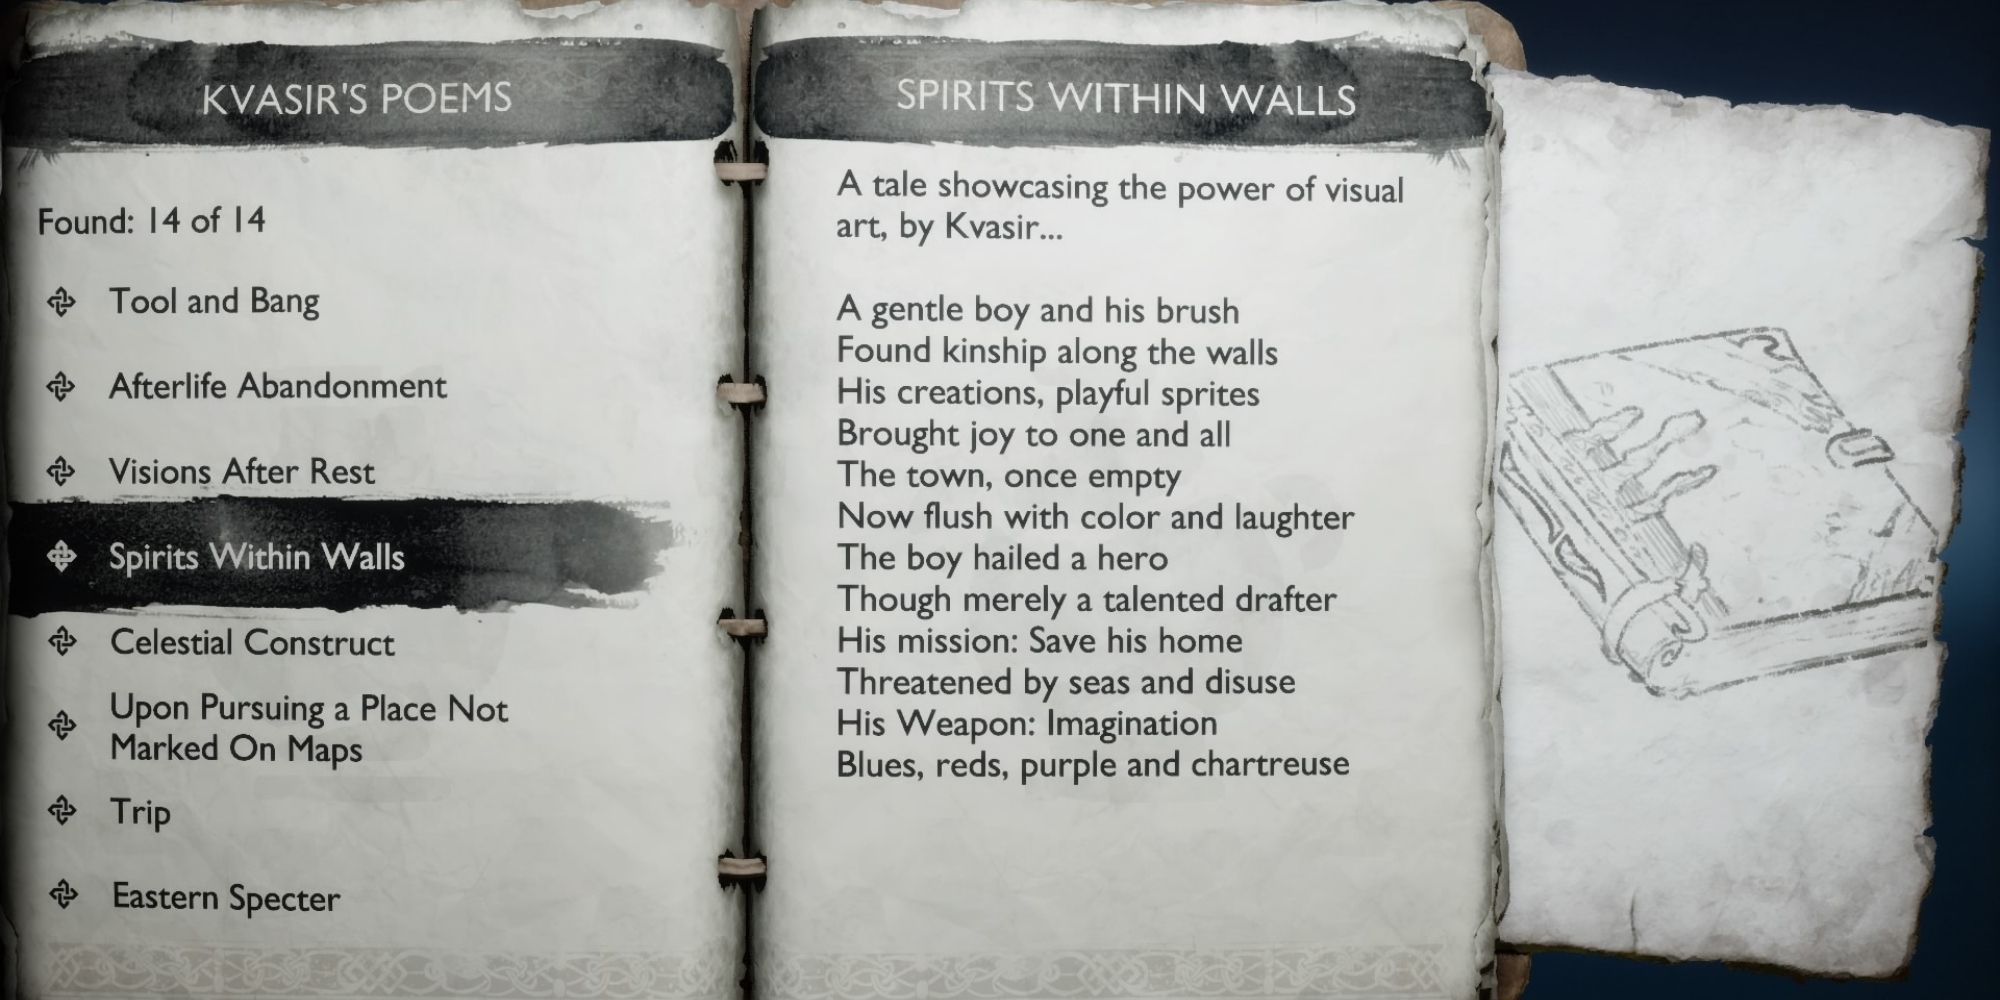 Krato's journal open to the page about Spirits Within Walls